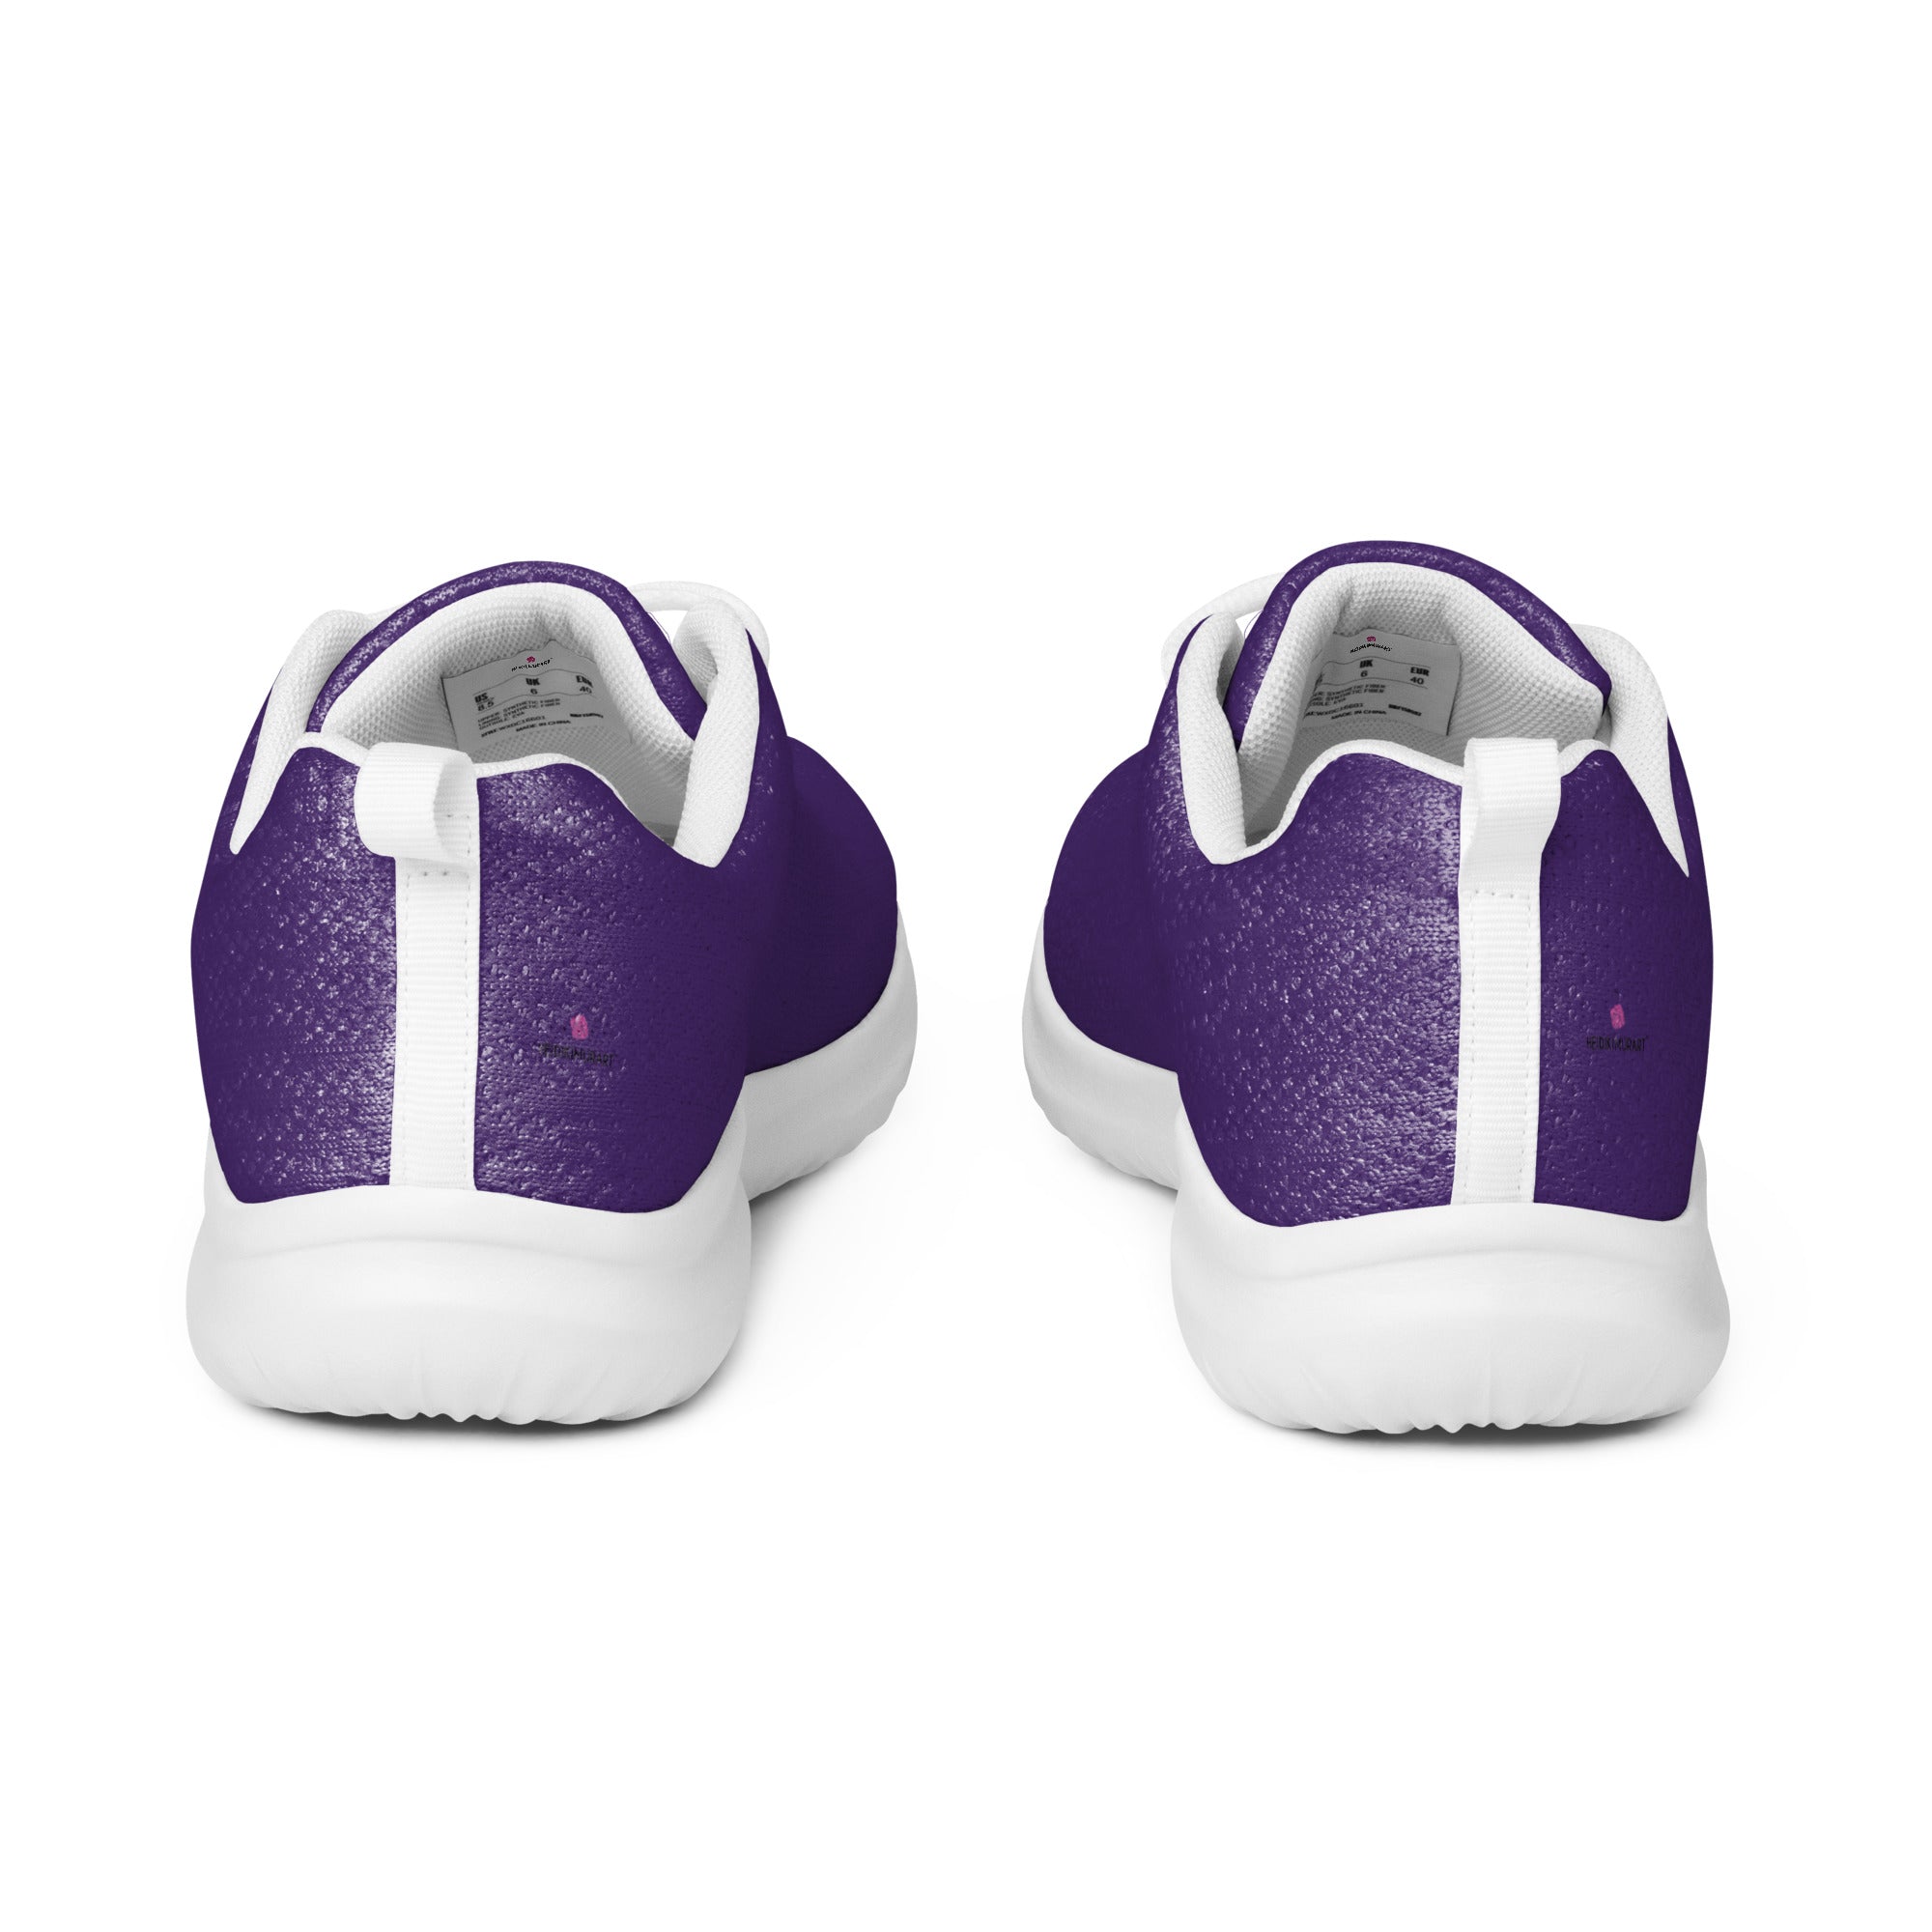 Dark Purple Men’s Athletic Shoes, Solid Purple Color Men's Sneakers, Solid Color Modern Breathable Lightweight Best Premium Designer Men’s Lace-up Low Top Sneakers, Modern Essential Classic Every Day Best Quality Fashionable Running Casual Breathable Comfortable Running Shoes With White Laces and Padded Tongues and Thick Outsoles (US Size: 5-13)